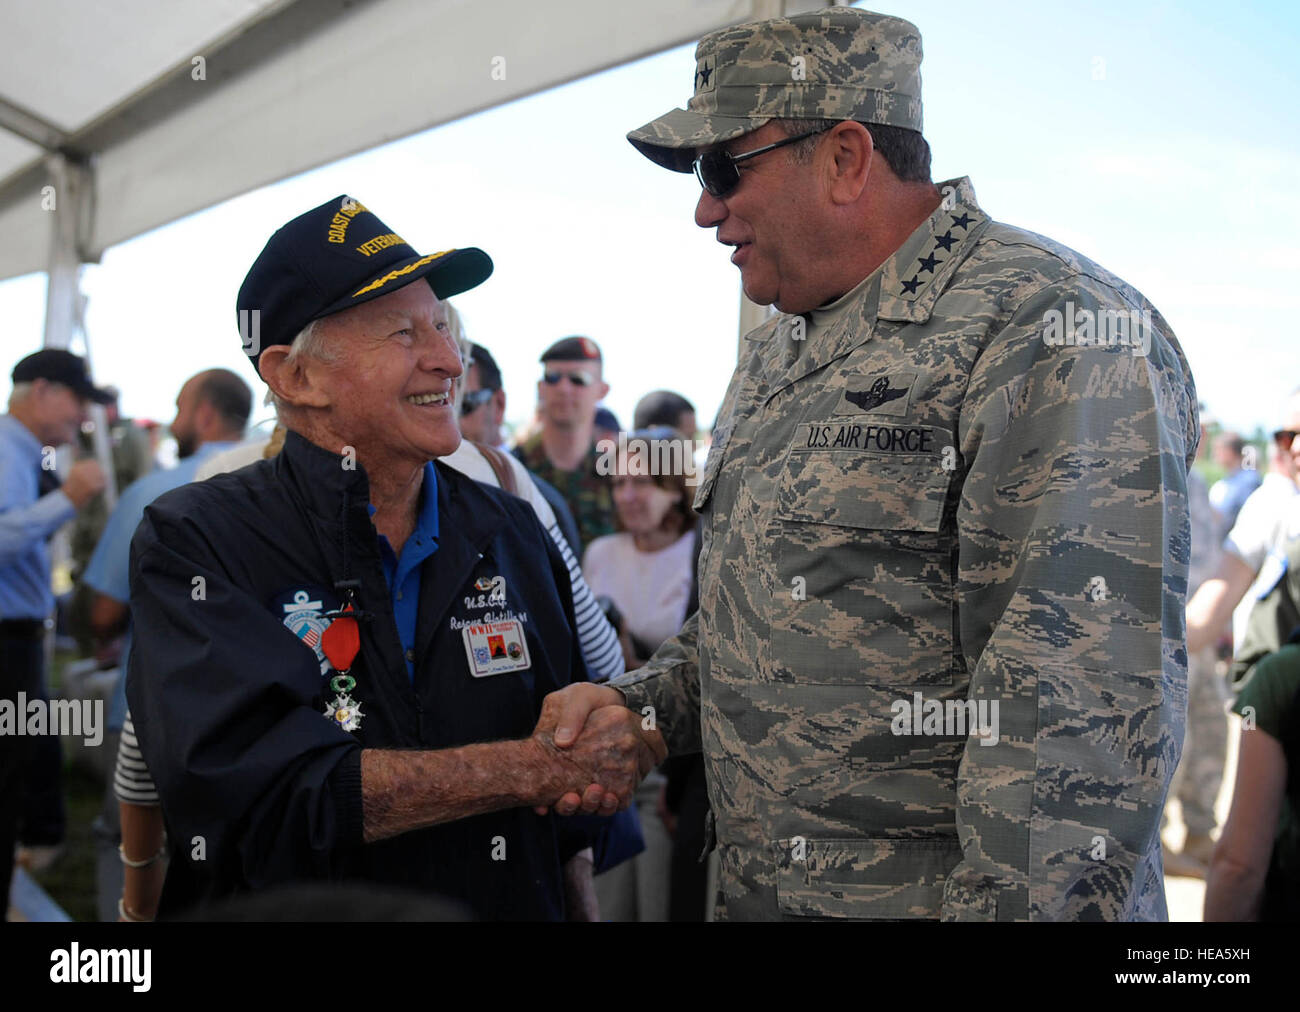 U.S. Air Force Gen. Philip M. Breedlove, Commander, U.S. European Command and NATO Supreme Allied Commander Europe, visits with World War II veterans at a paratrooper drop at Iron Mike memorial here, June 8, 2014. More than 600 U.S., German, Dutch and French service members jumped to honor the paratroopers that jumped into Normandy on D-Day. The event was one of several commemorations of the 70th Anniversary of D-Day operations conducted by Allied forces during World War II June 5-6, 1944. Over 650 U.S. military personnel have joined troops from several NATO nations to participate in ceremonie Stock Photo